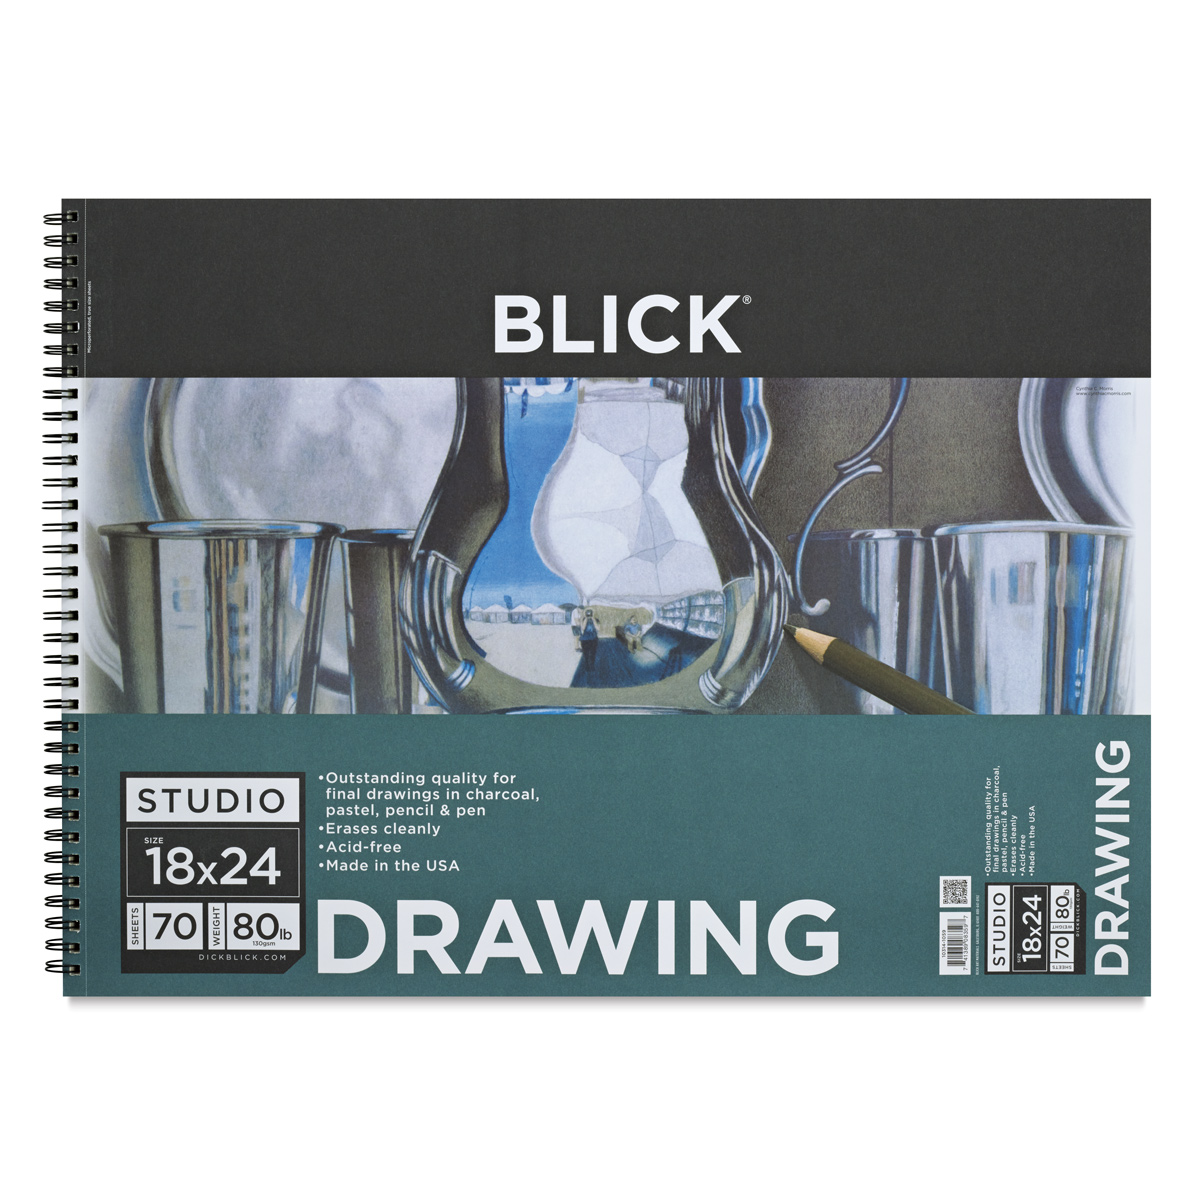 BLICK STUDIO Canvas Pad 10 Sheets 9 x 12 Canvas Paper NEW (Not Sealed)